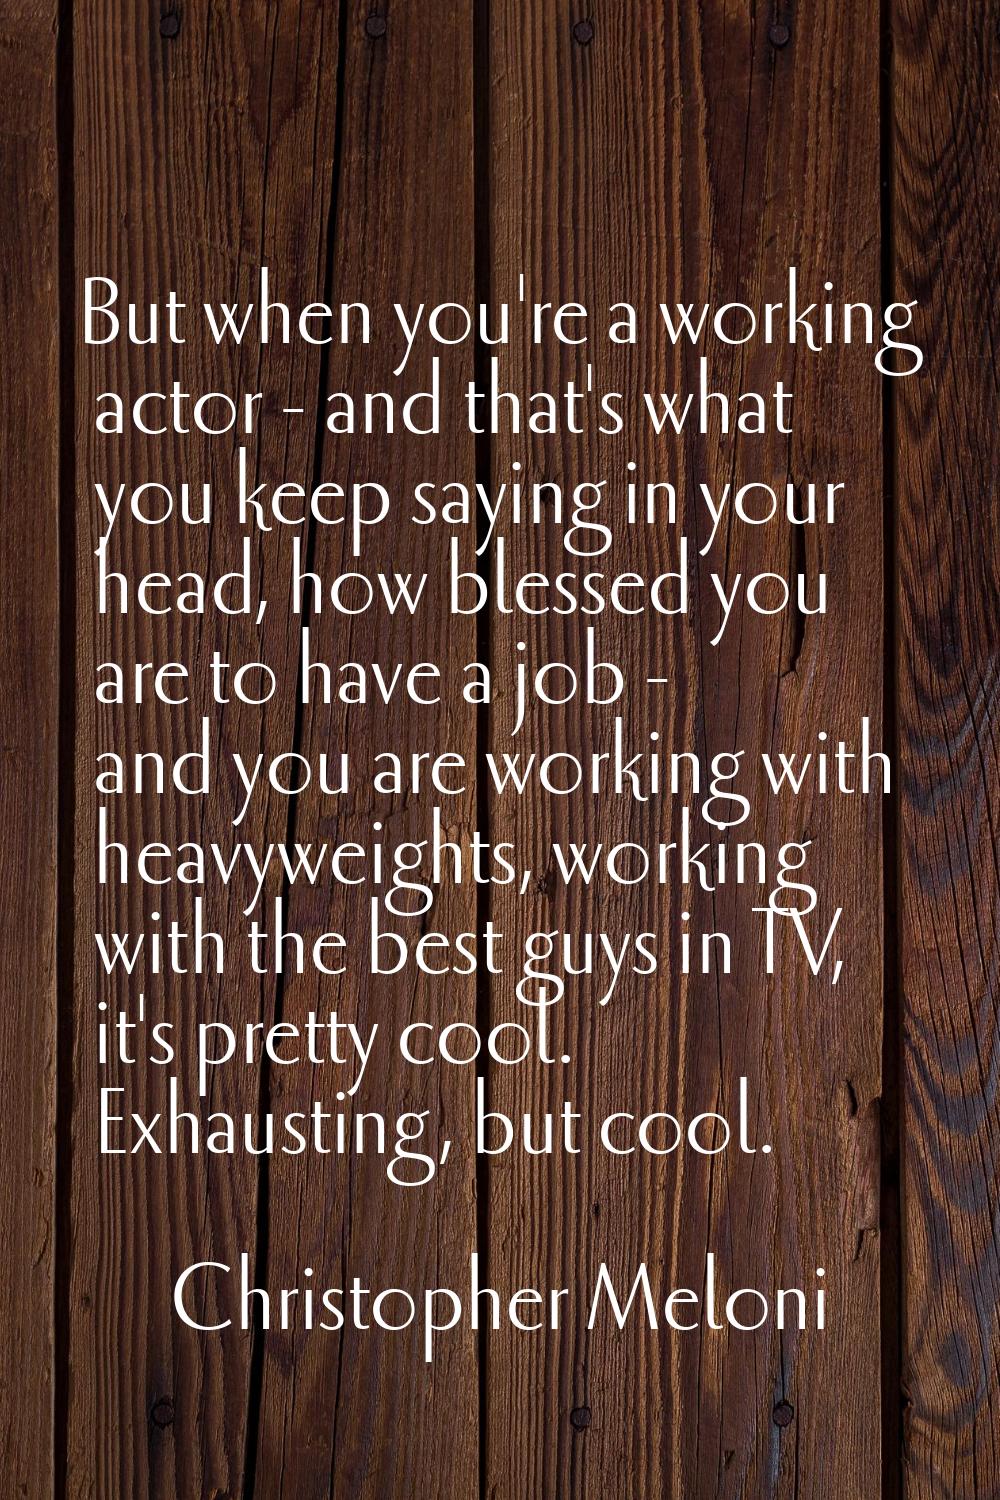 But when you're a working actor - and that's what you keep saying in your head, how blessed you are